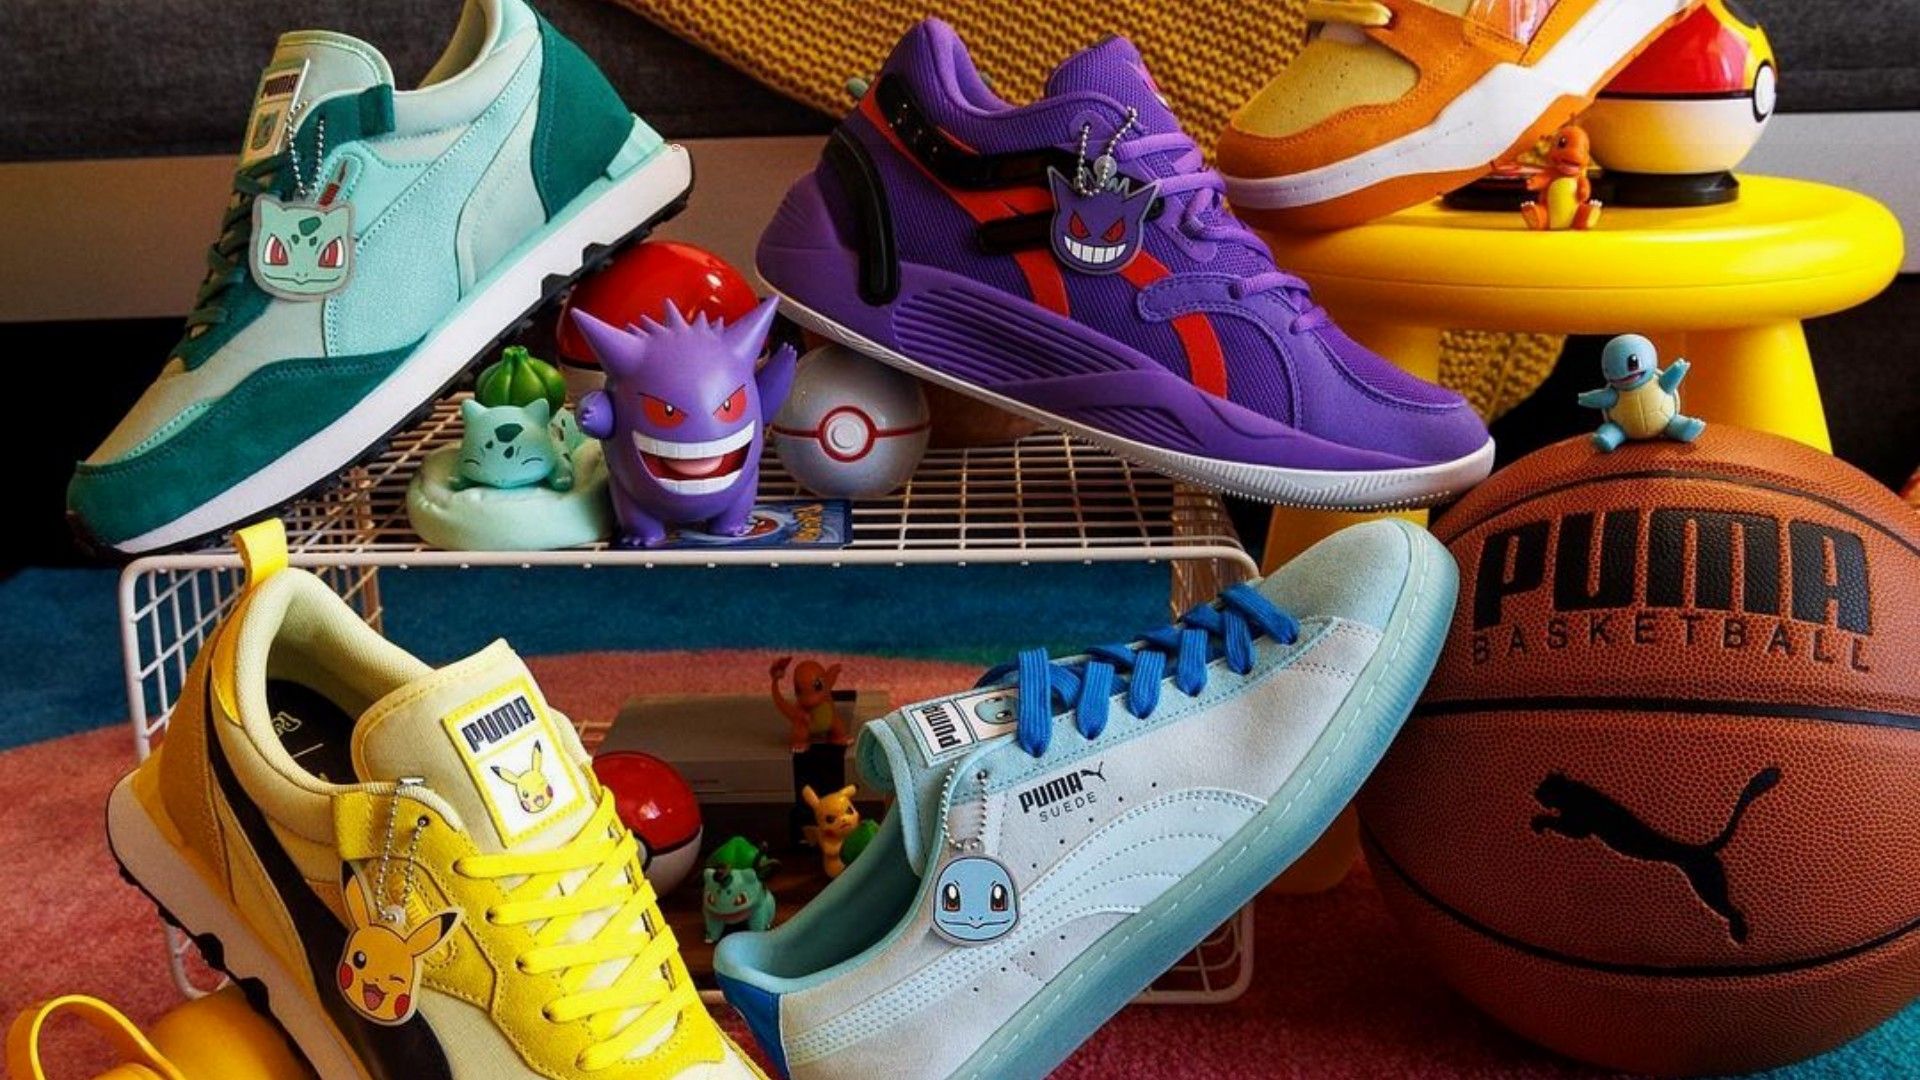 Puma's New Pokemon Shoes Collection! Will You Catch Them All?